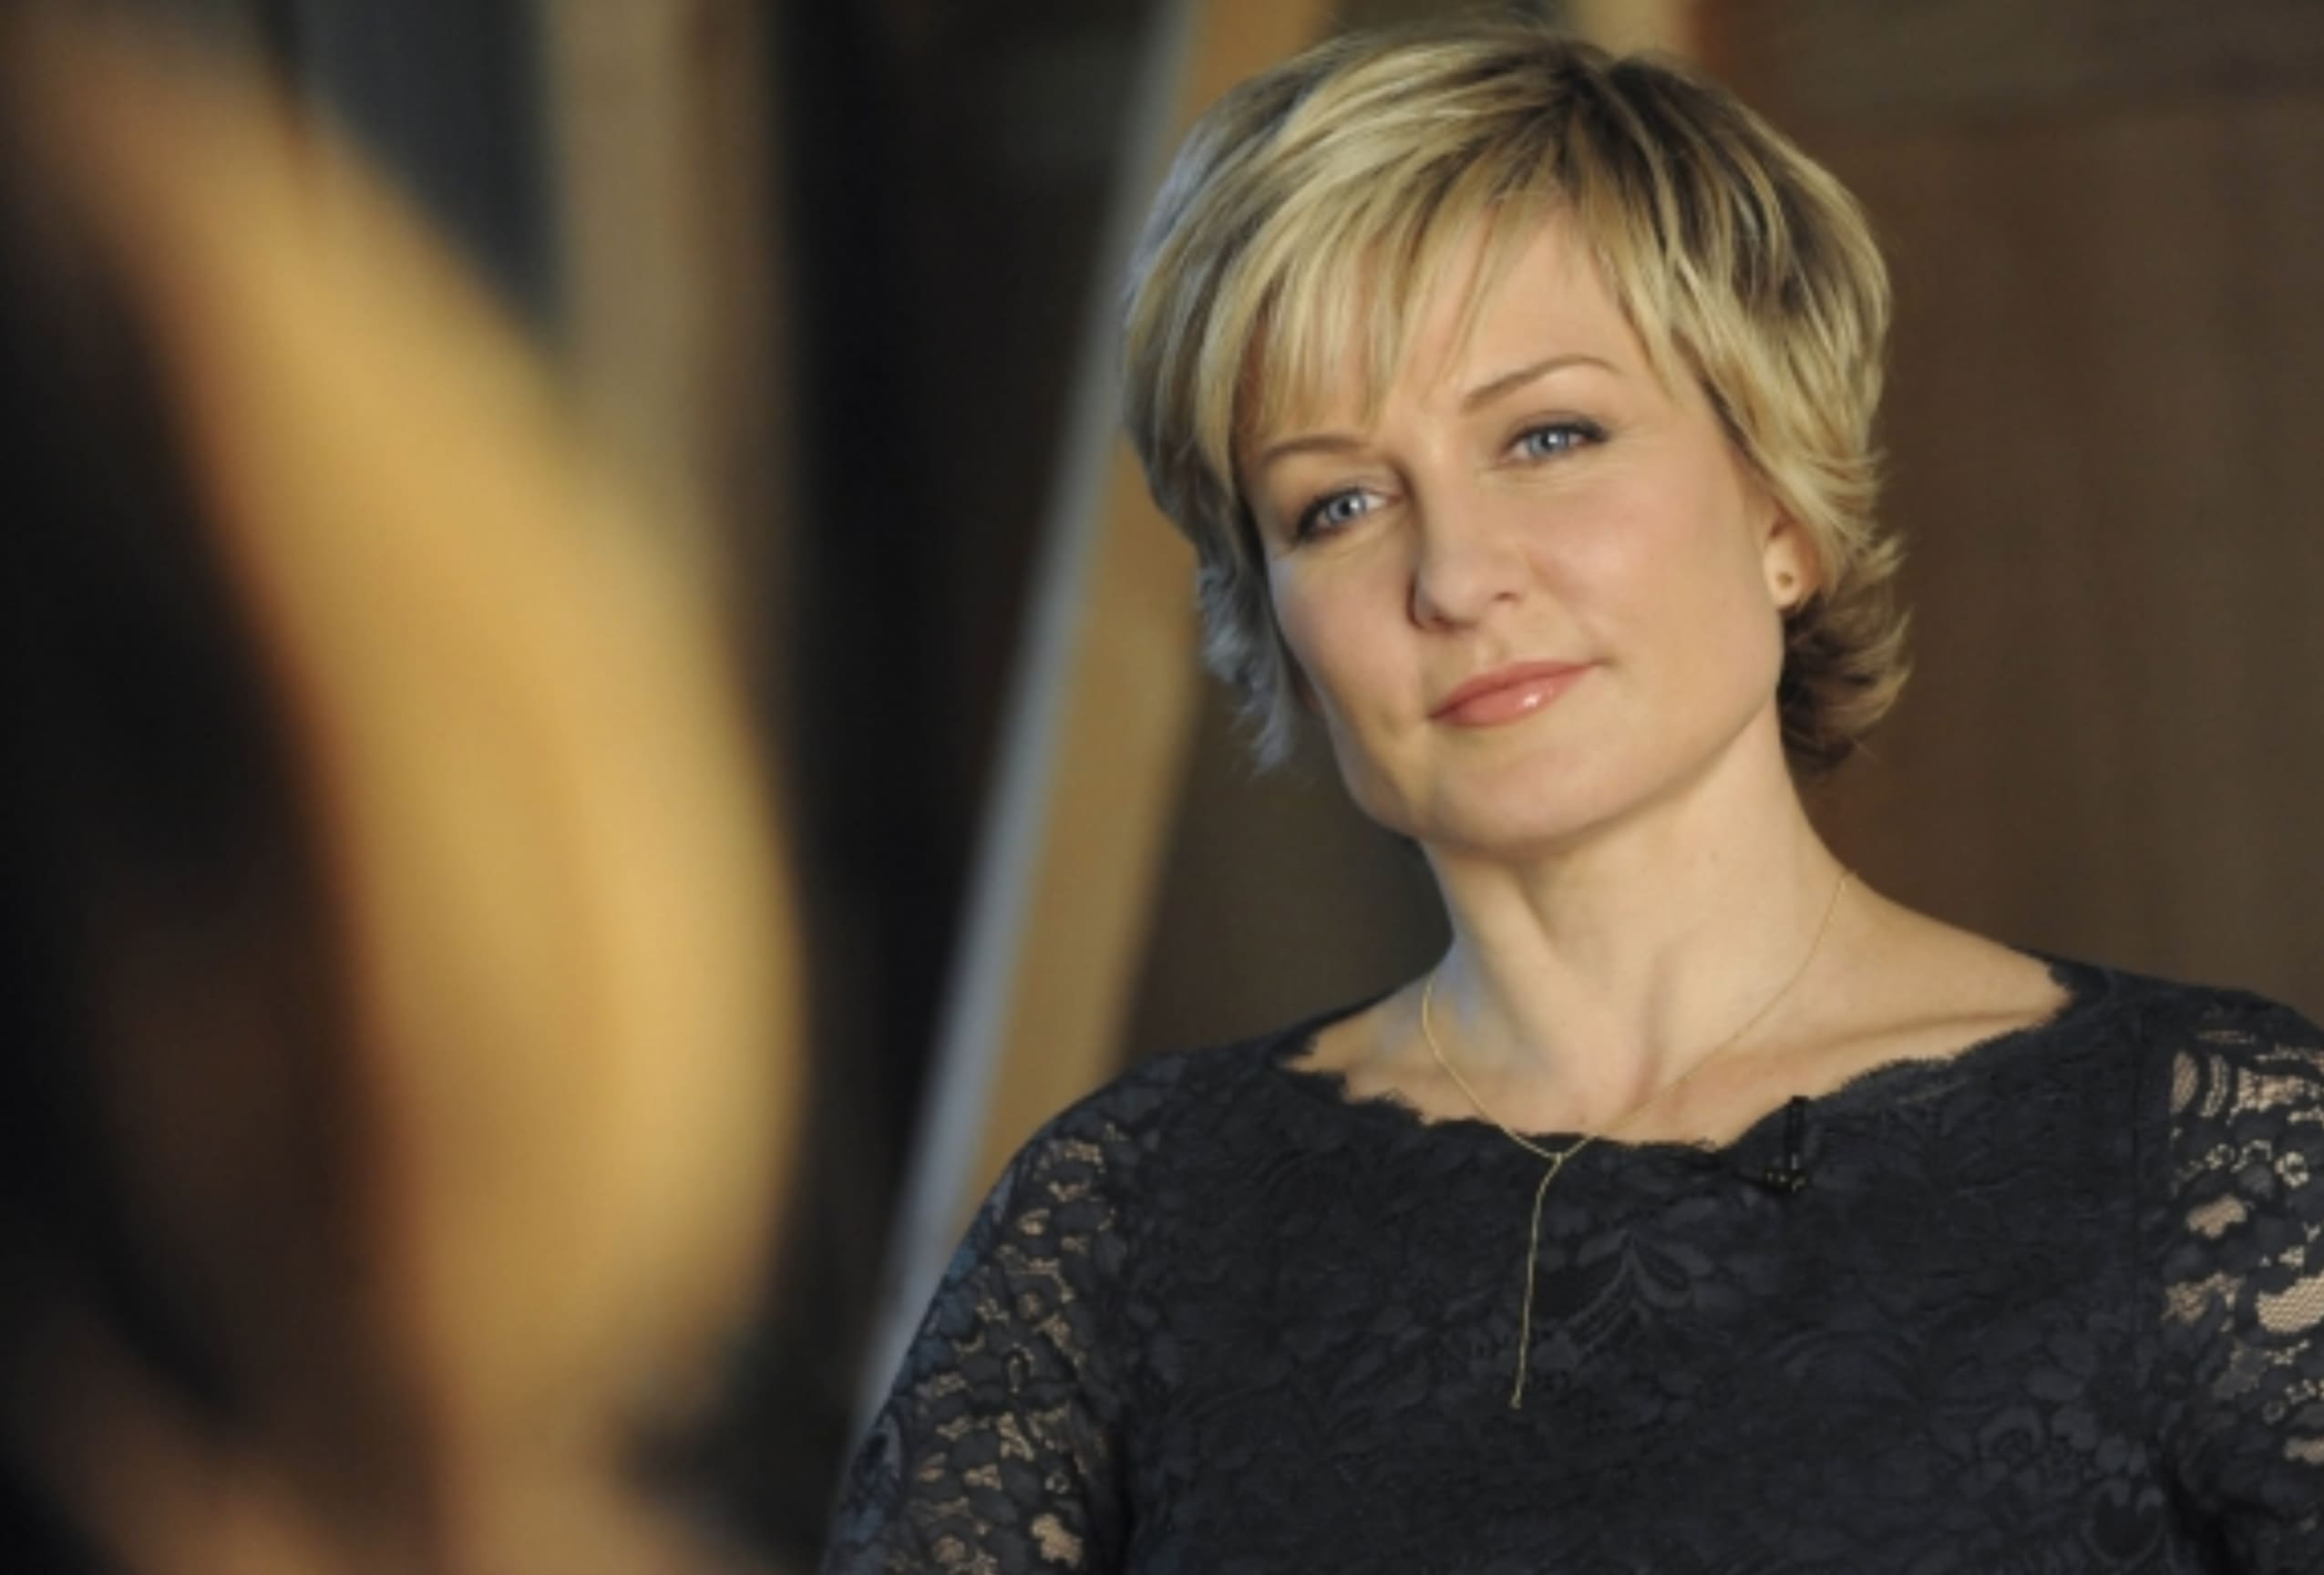 Amy carlson pictures